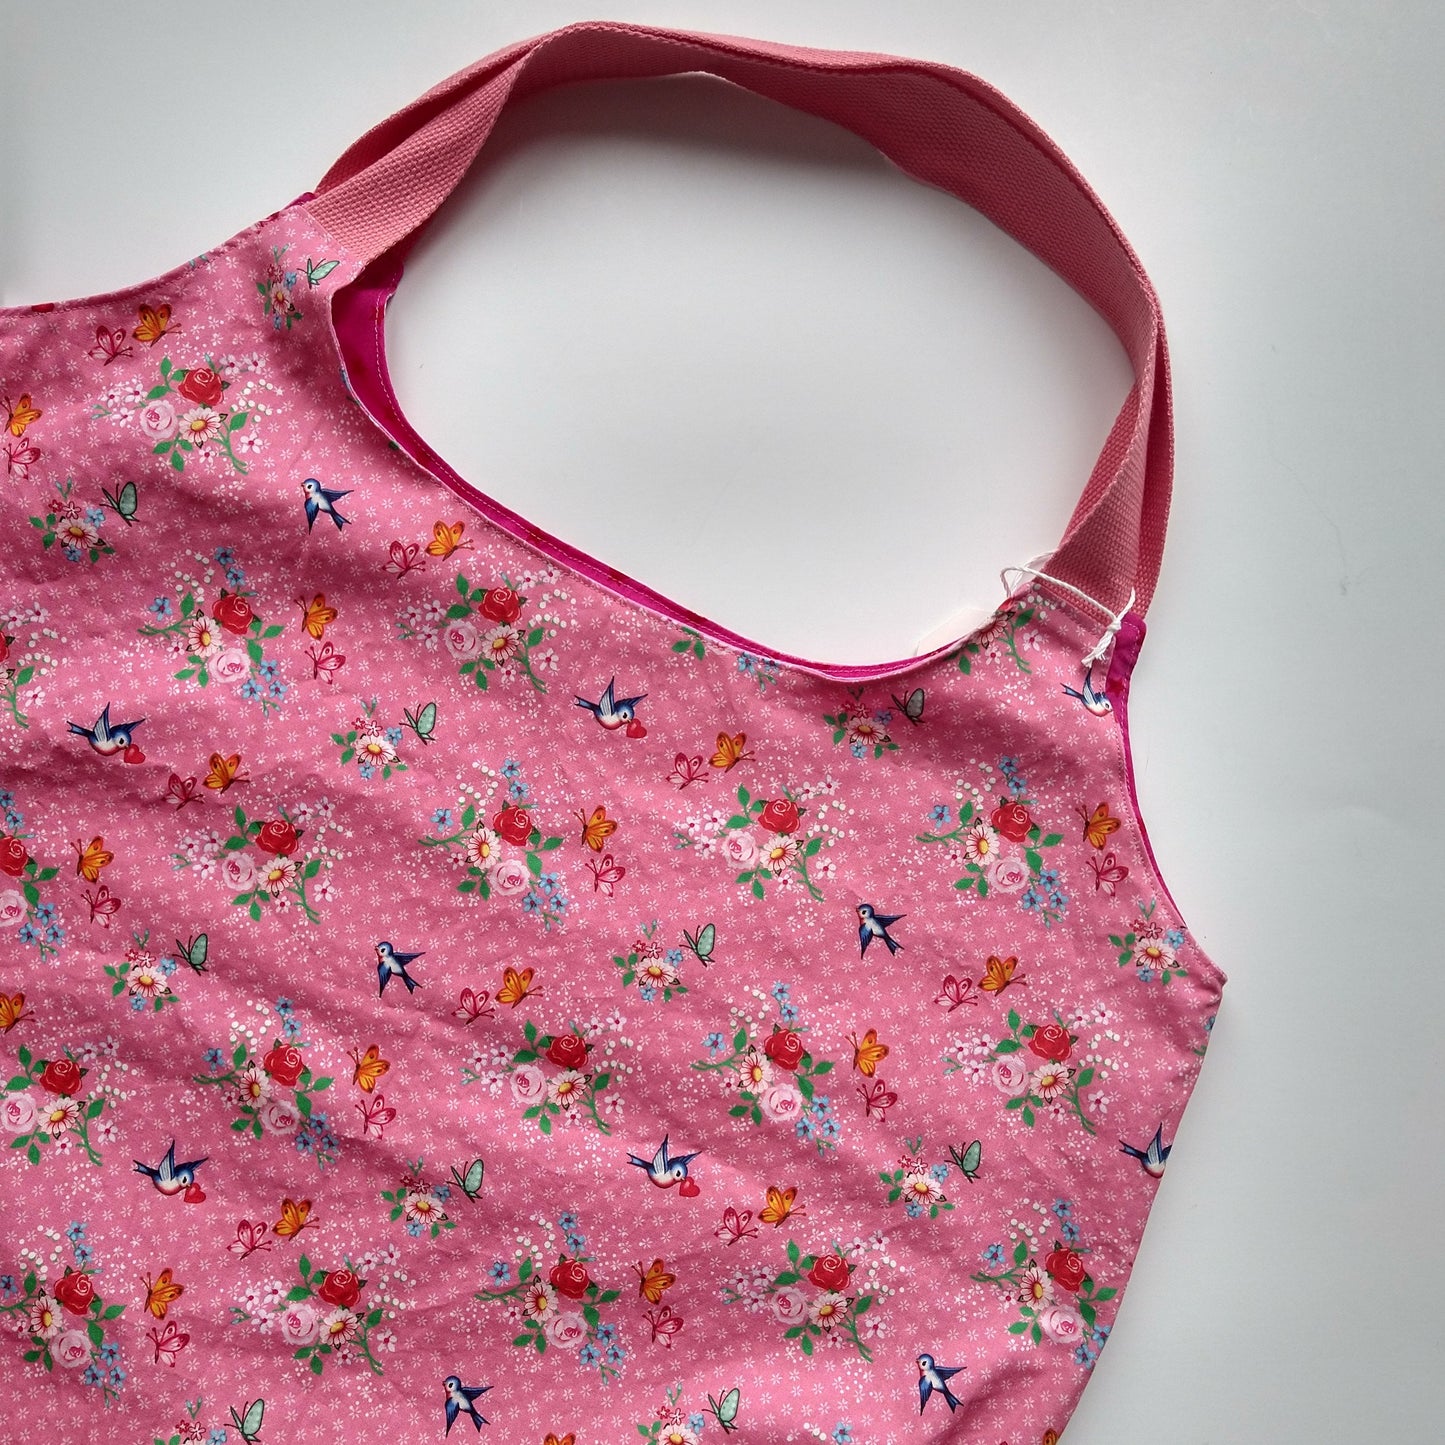 Shopping/Beach bag, reversible, size large, pink flowers and birds (Handmade in Canada)